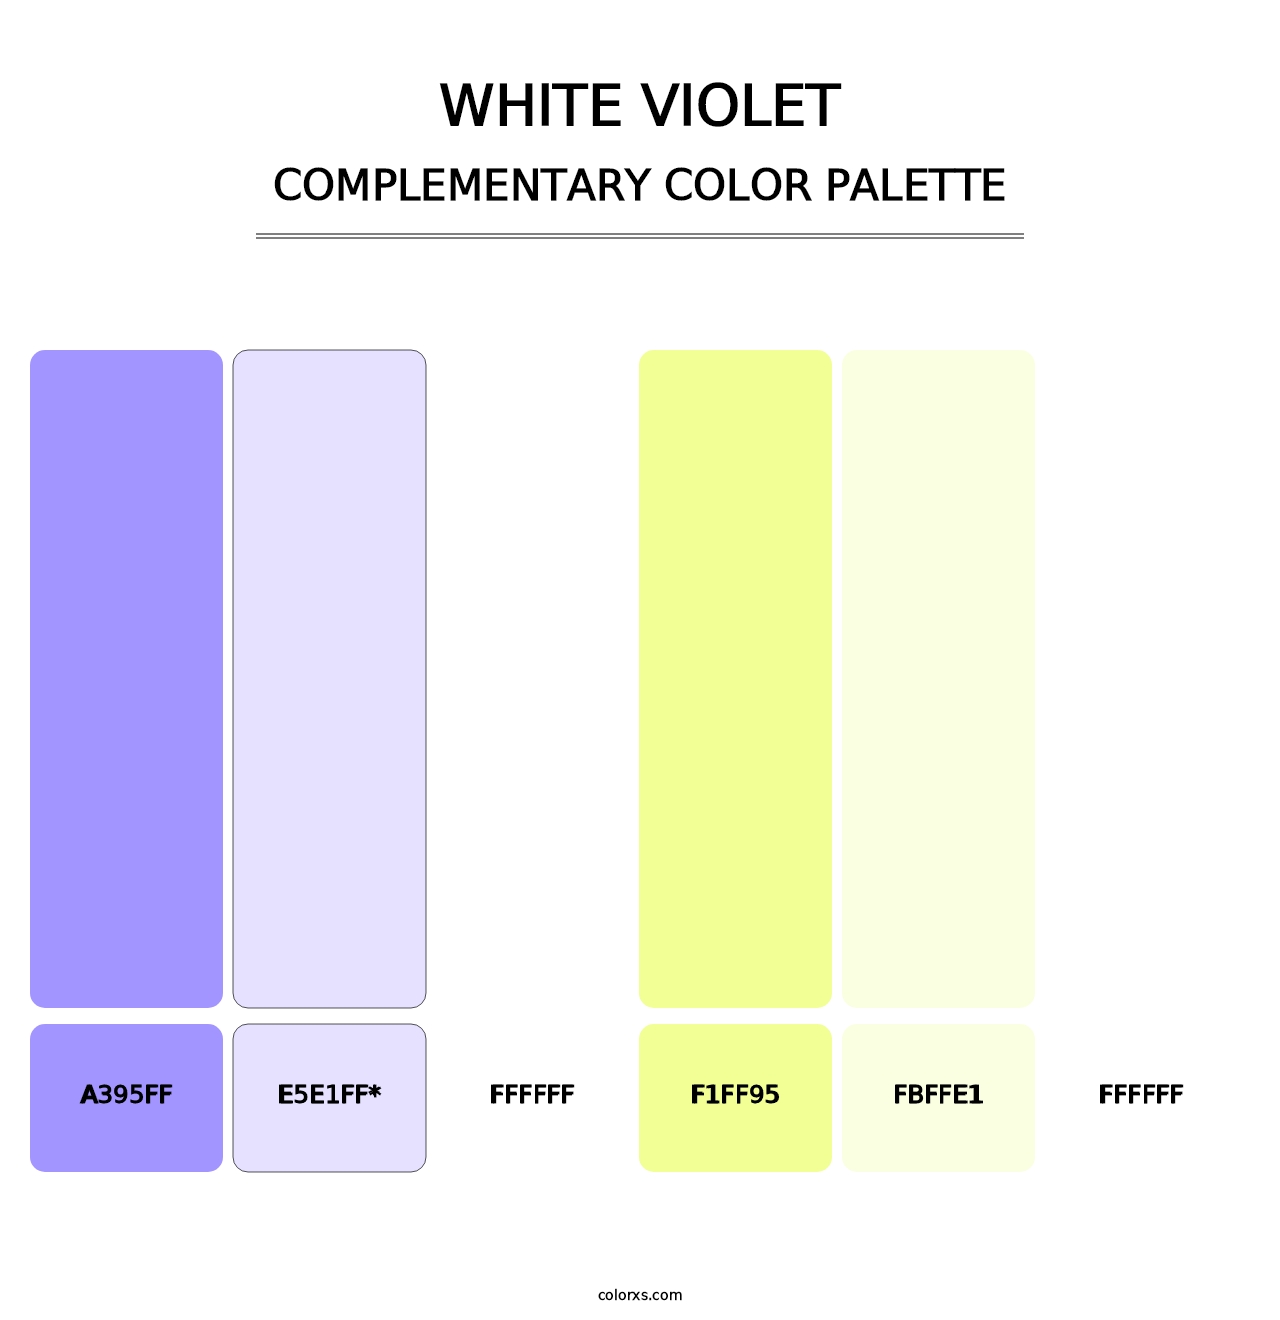 White Violet - Complementary Color Palette